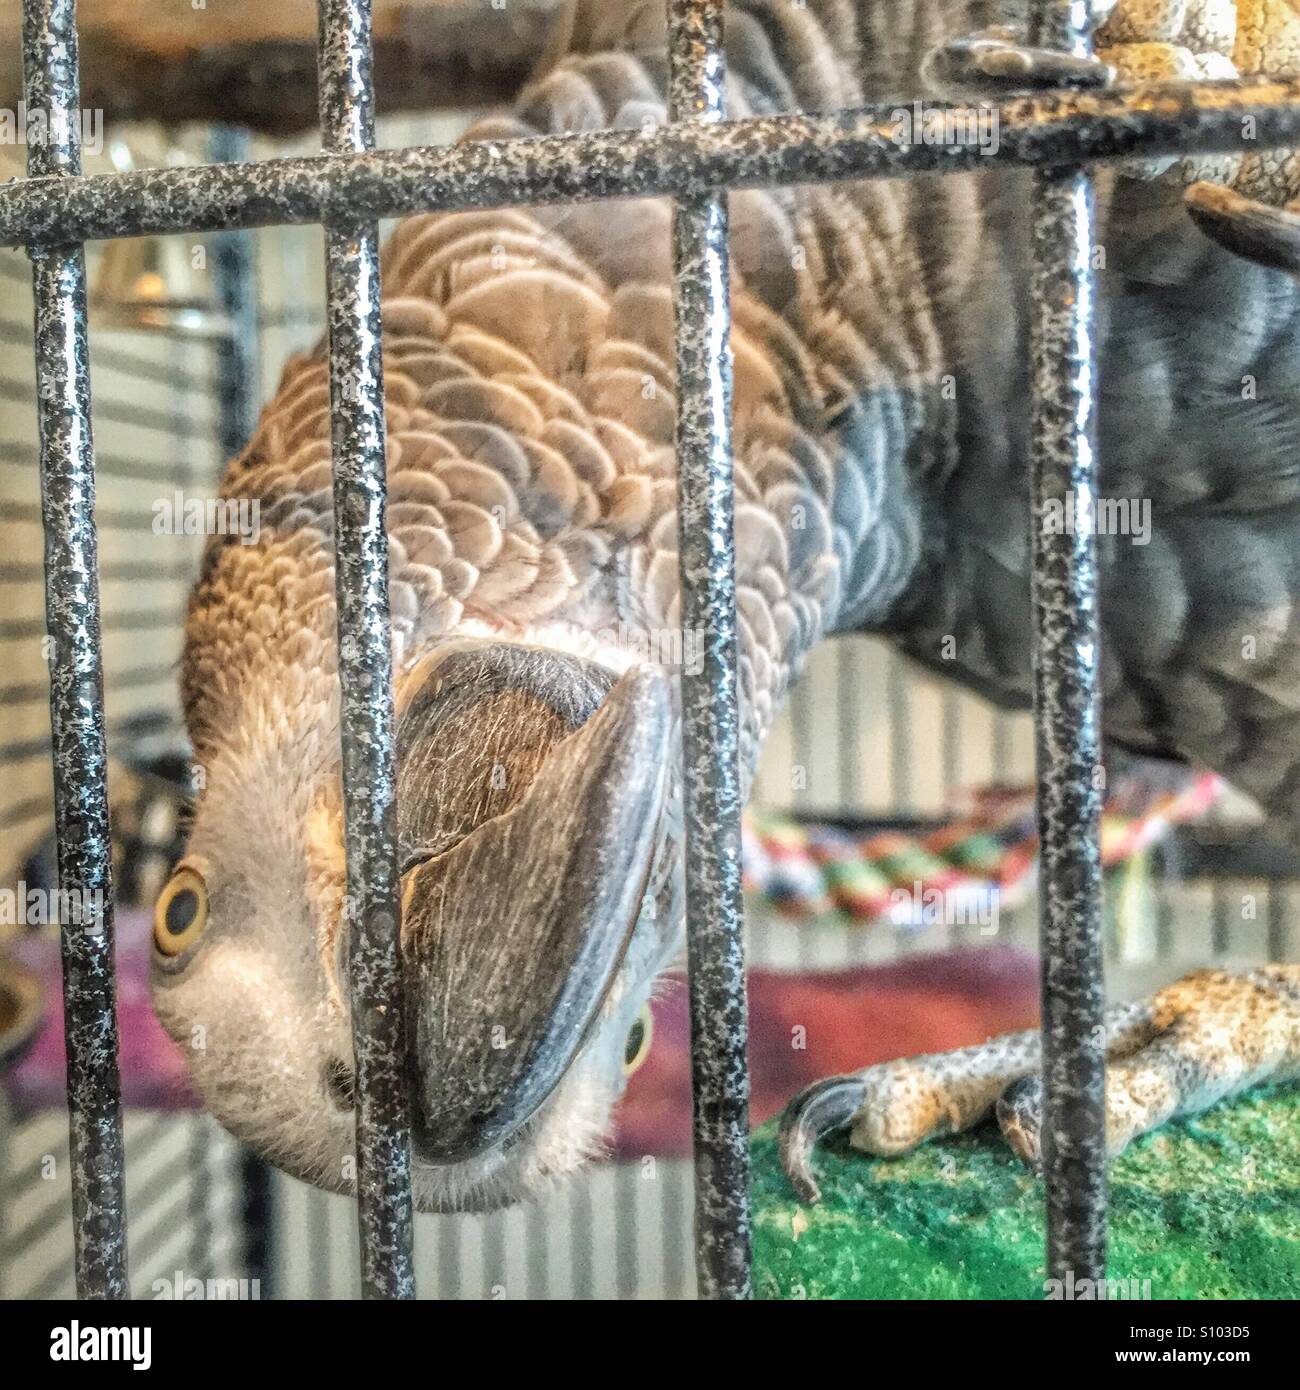 African grey parrot with head turned upside down looking out of cage. Stock Photo